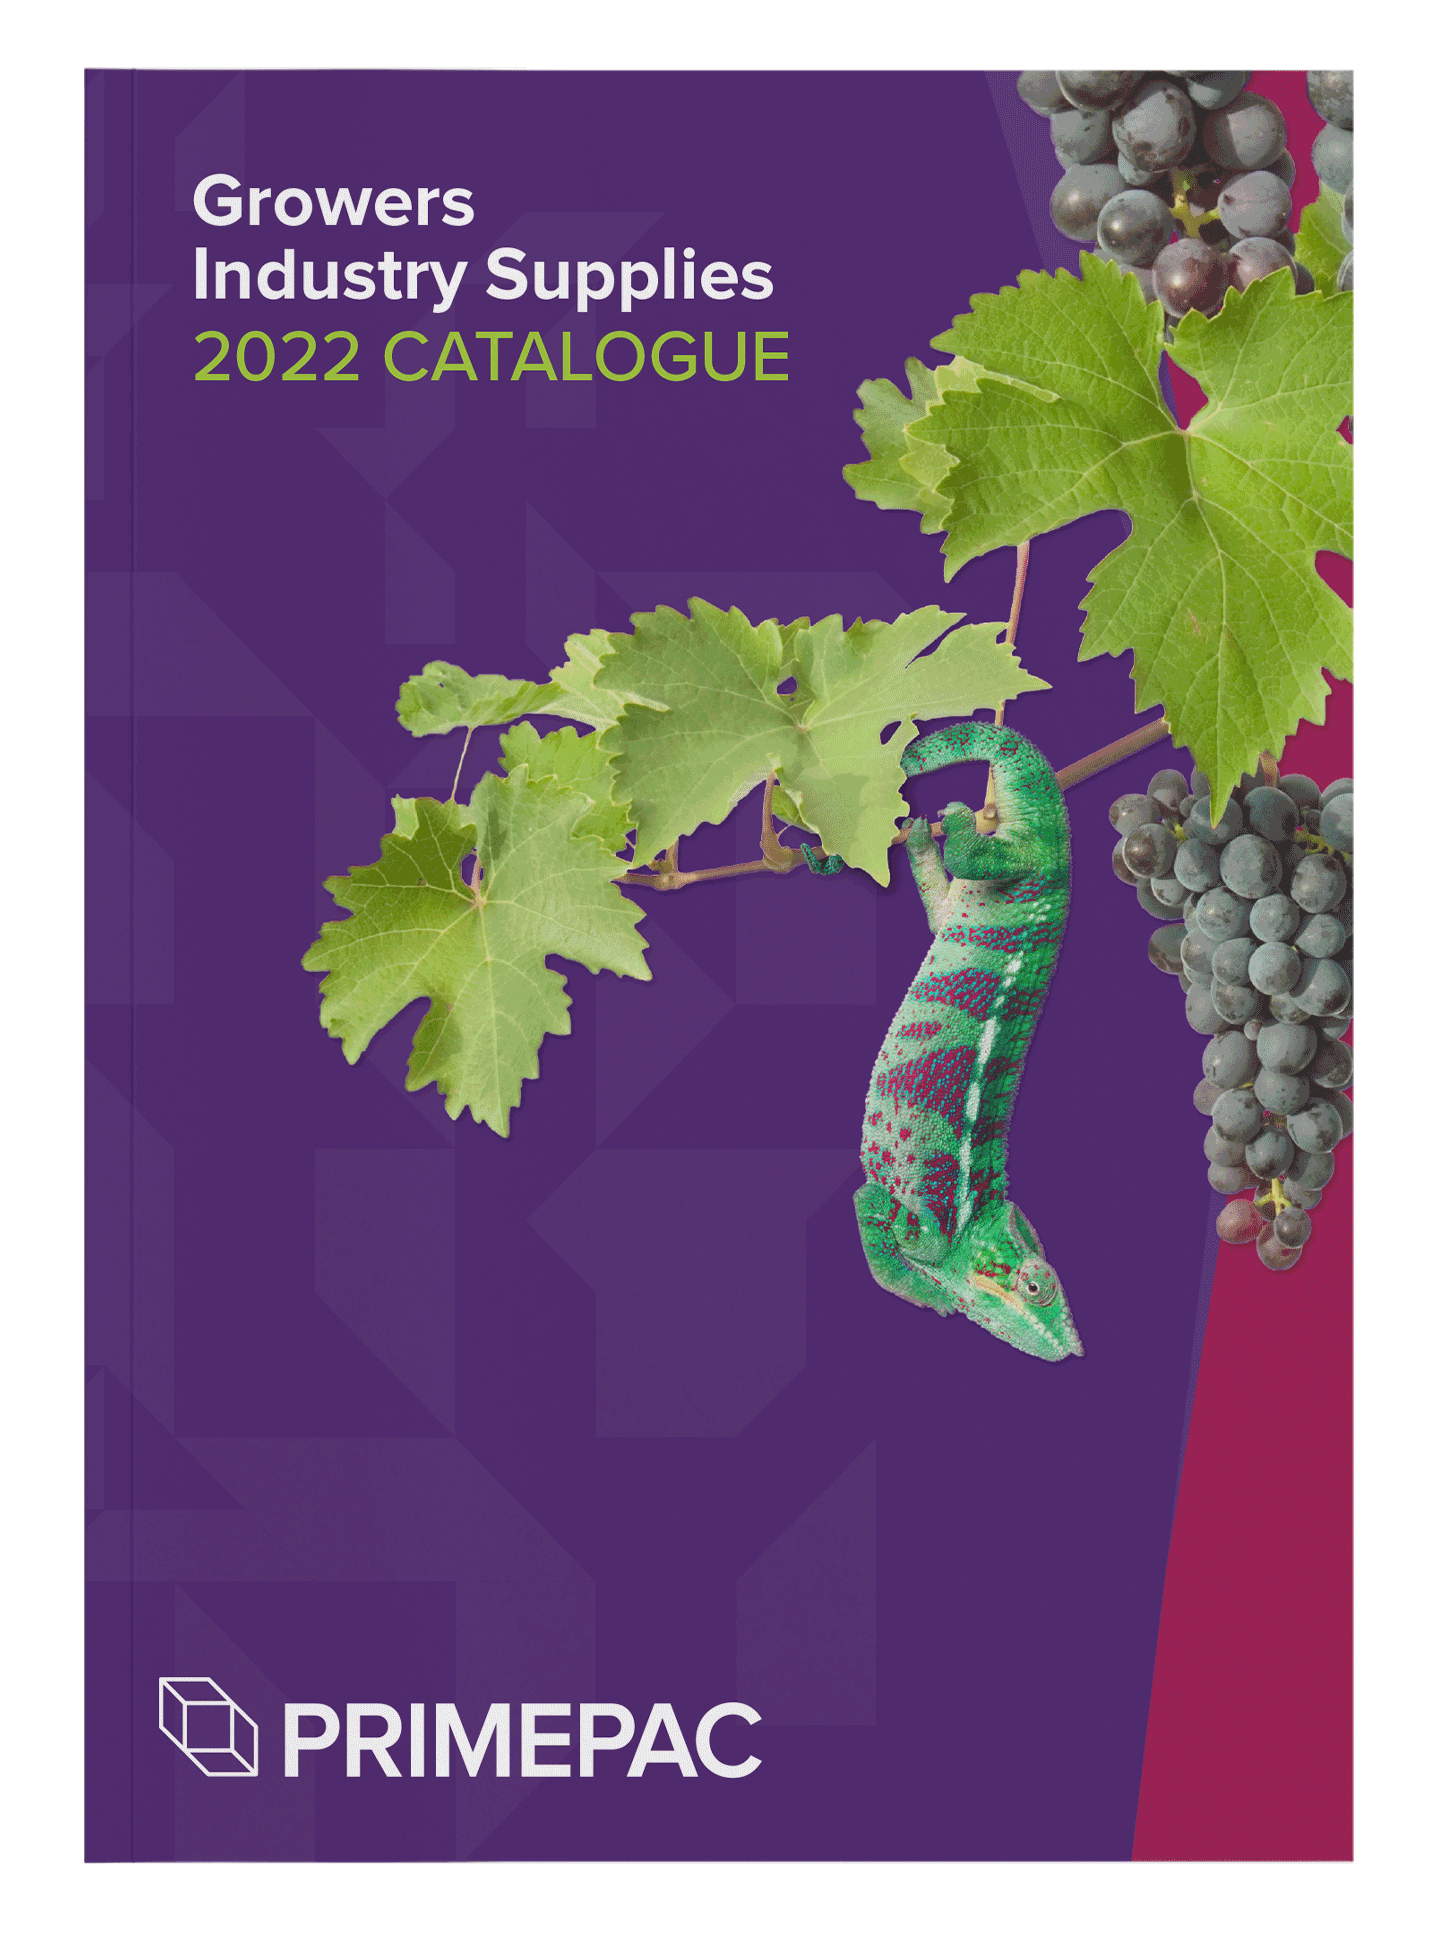 Growers industry catalogue